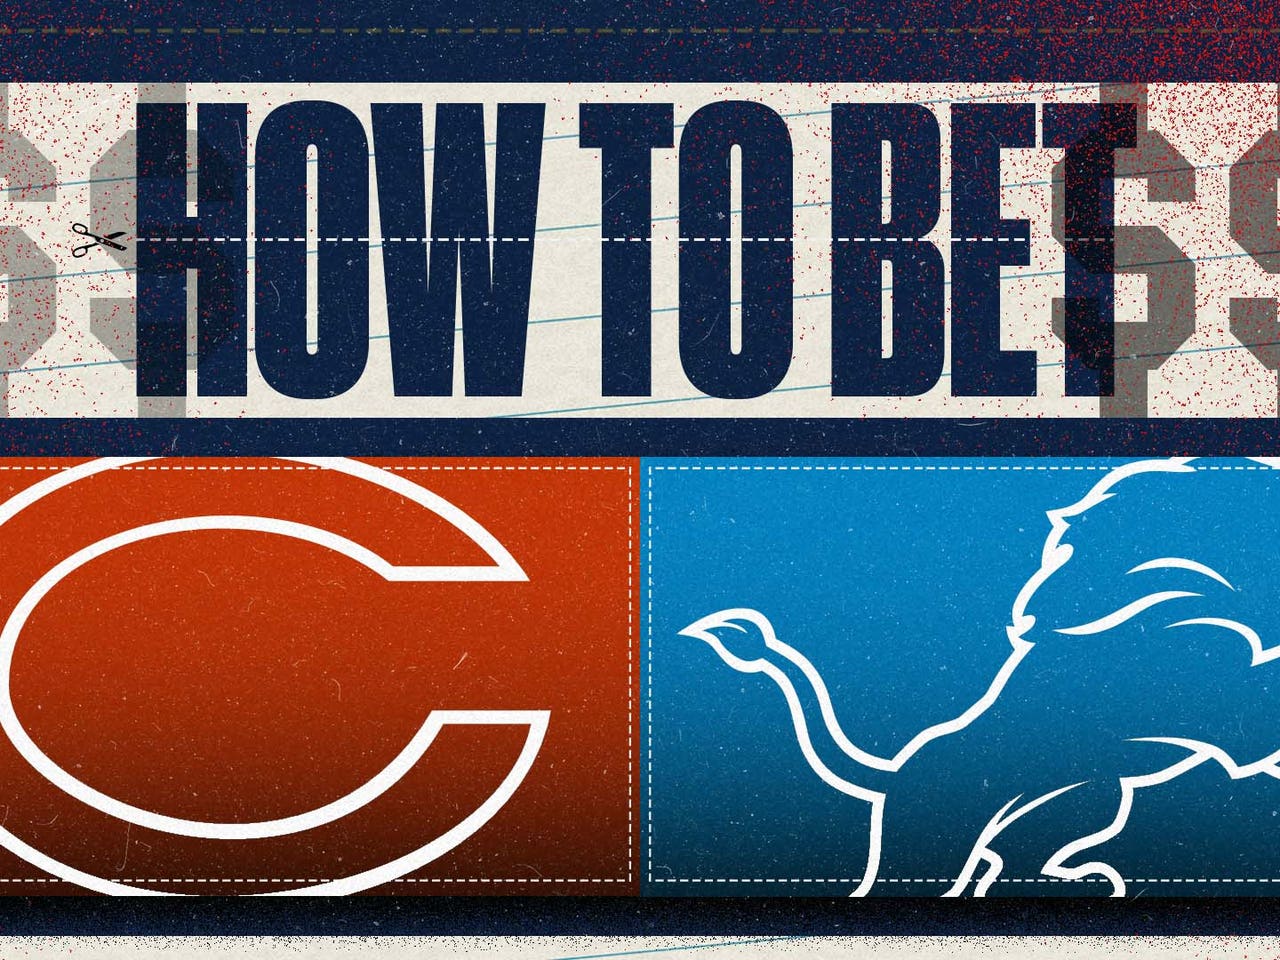 NFL odds: How to bet Bears vs. Lions, point spread, more